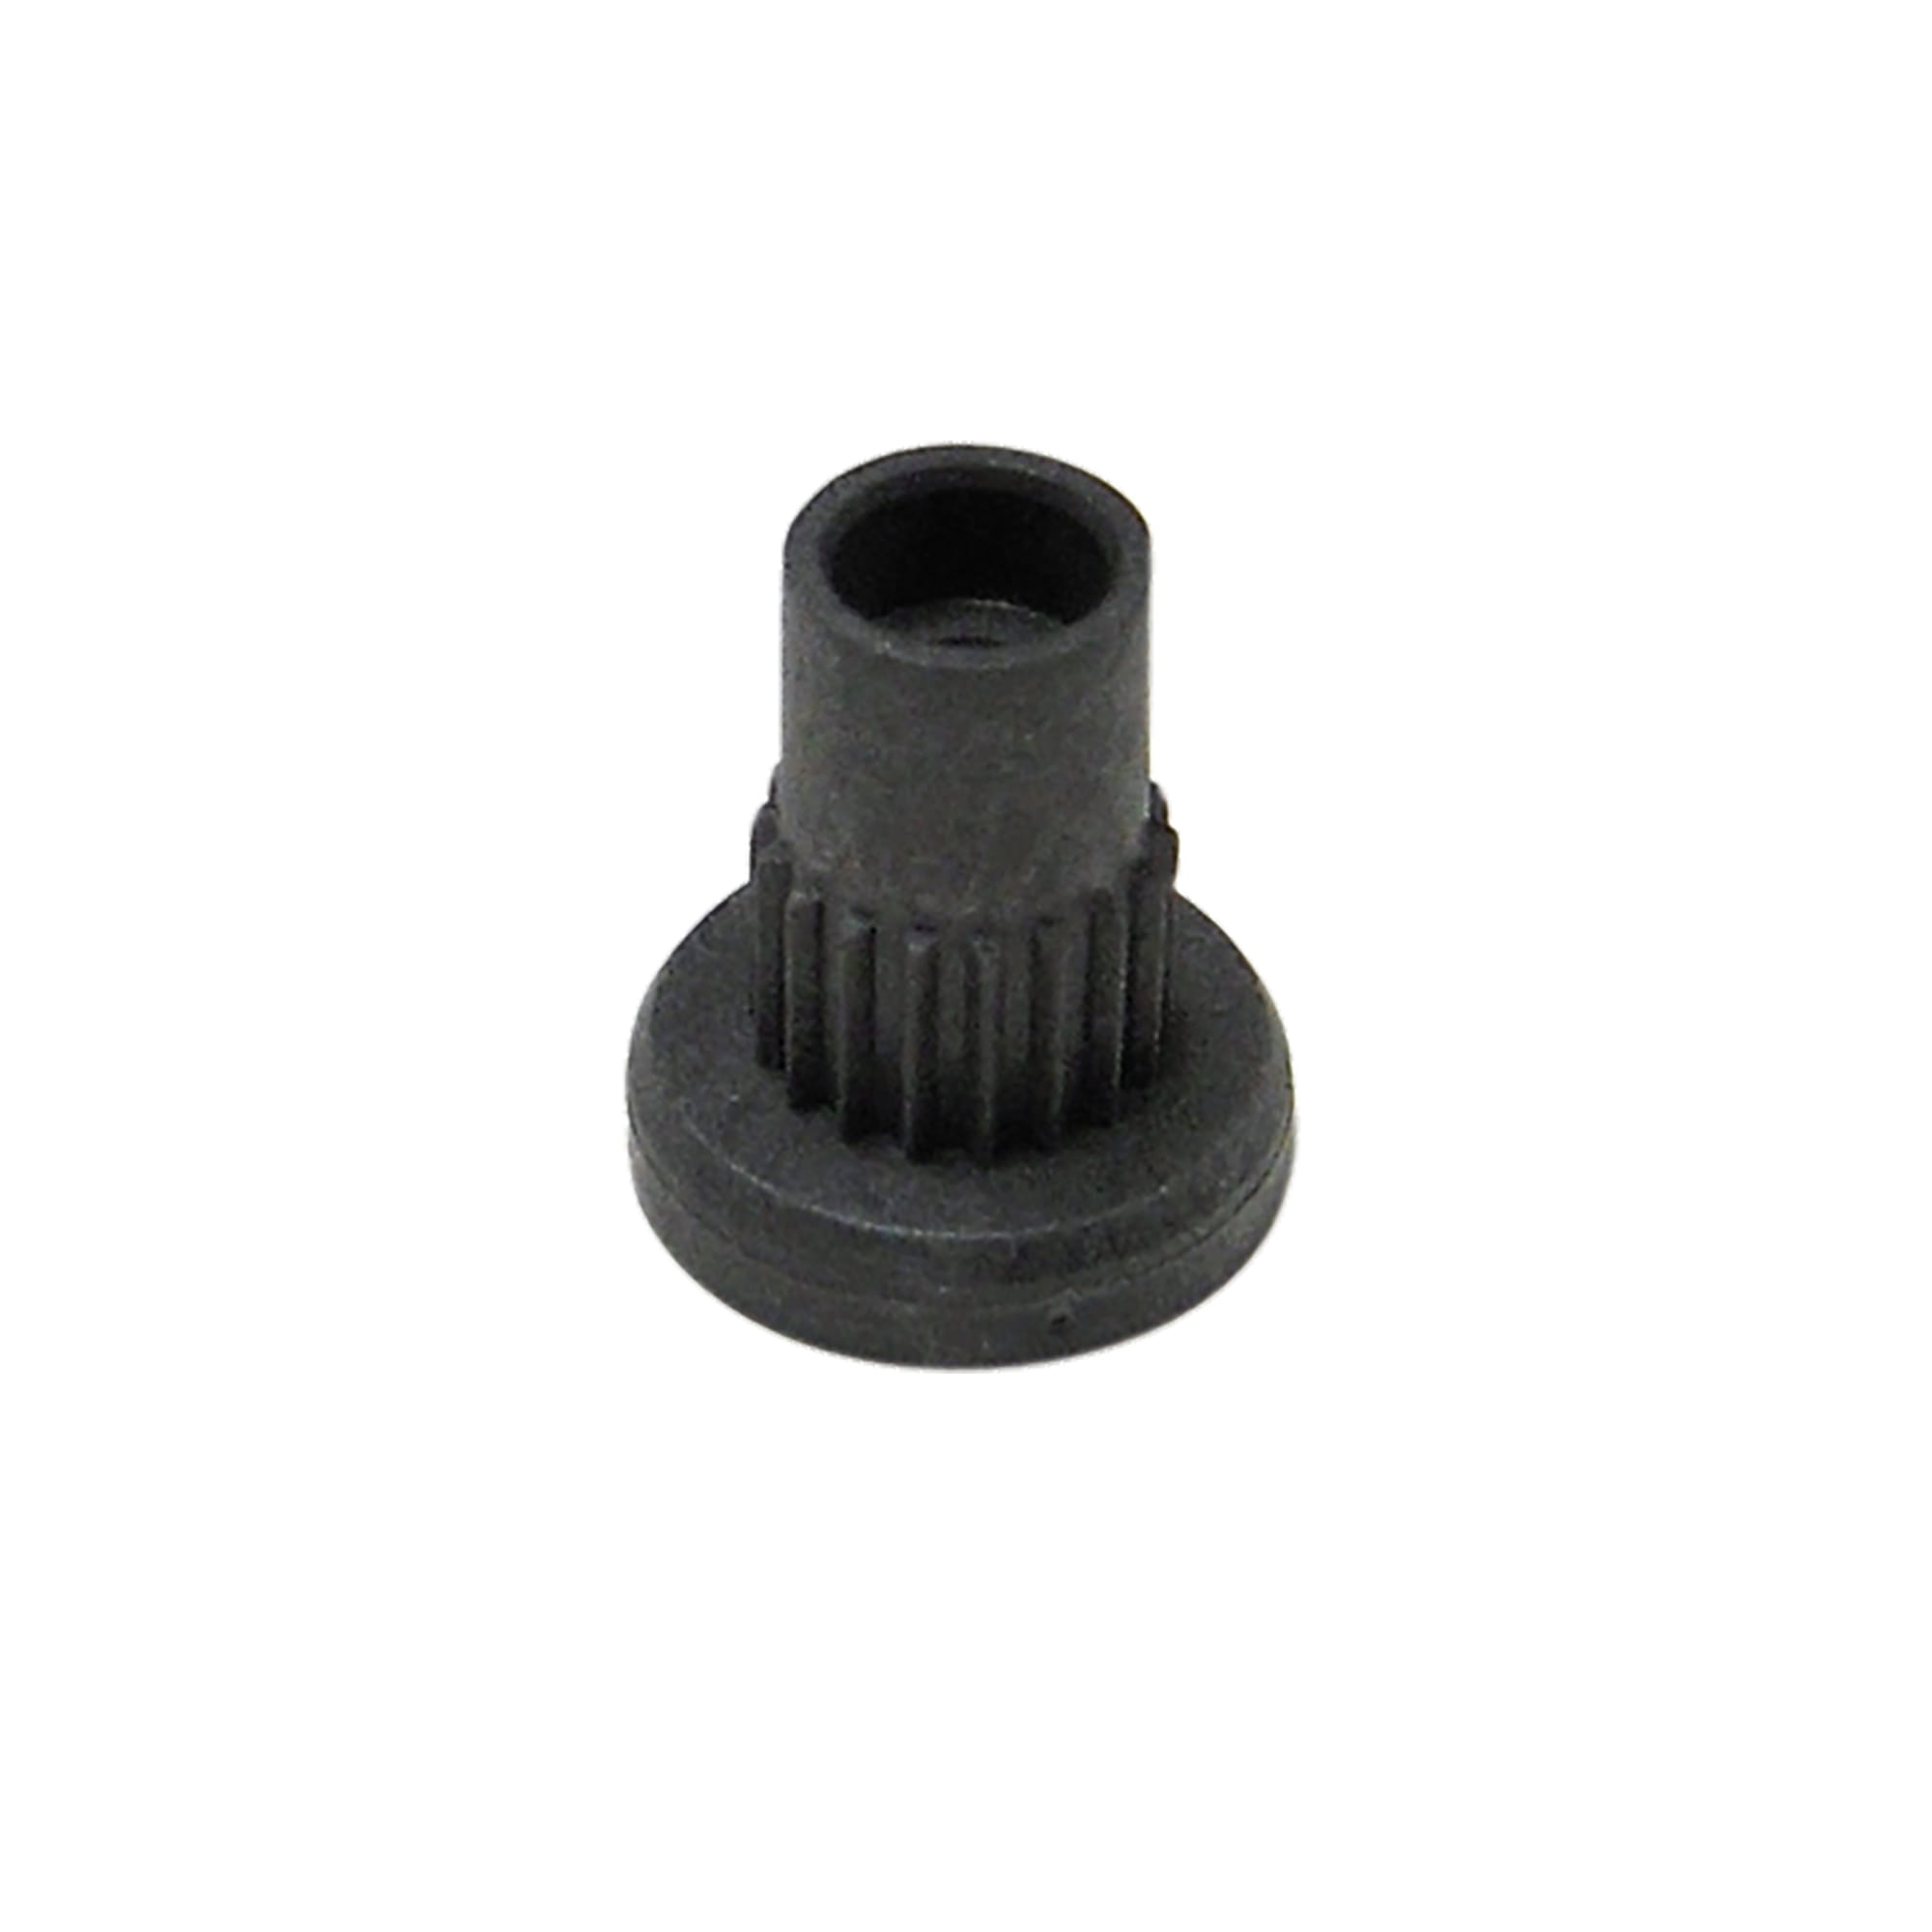 American Standard Adapter Colony Soft M918021-0070a for sale online 